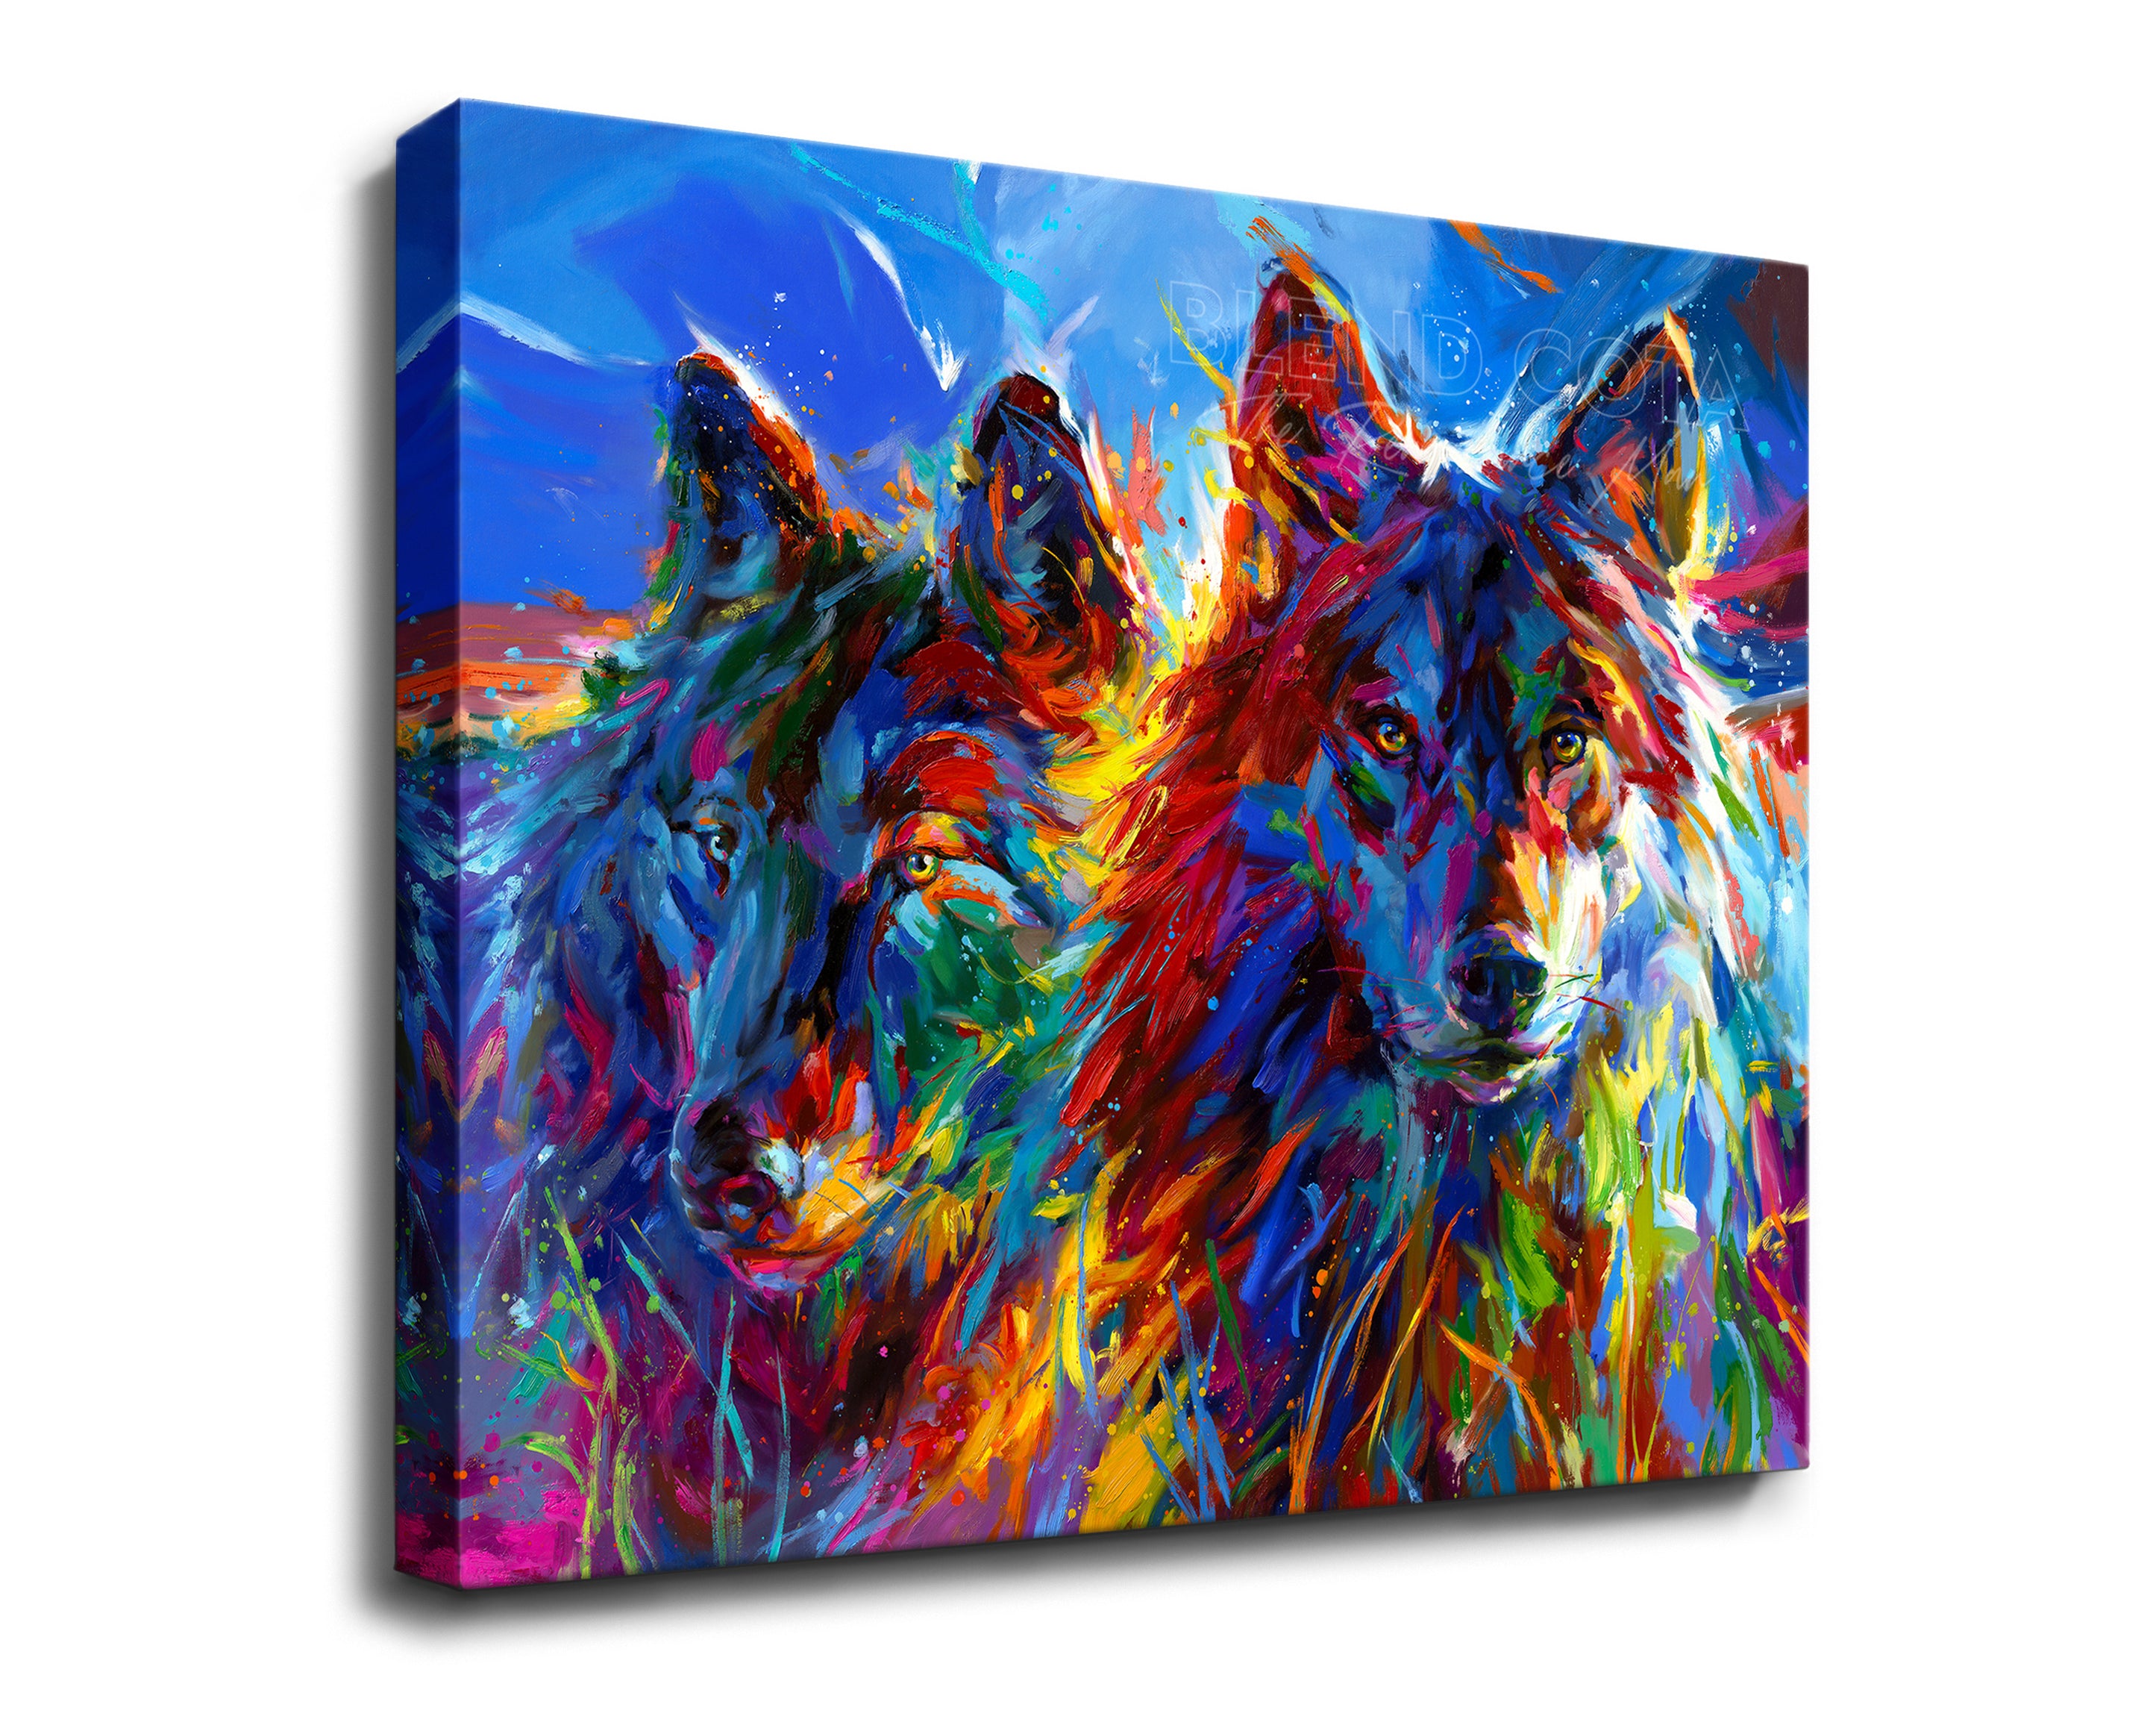 Wolves True Love painted by Blend Cota Art Print on Canvas from Blend Cota Studios 